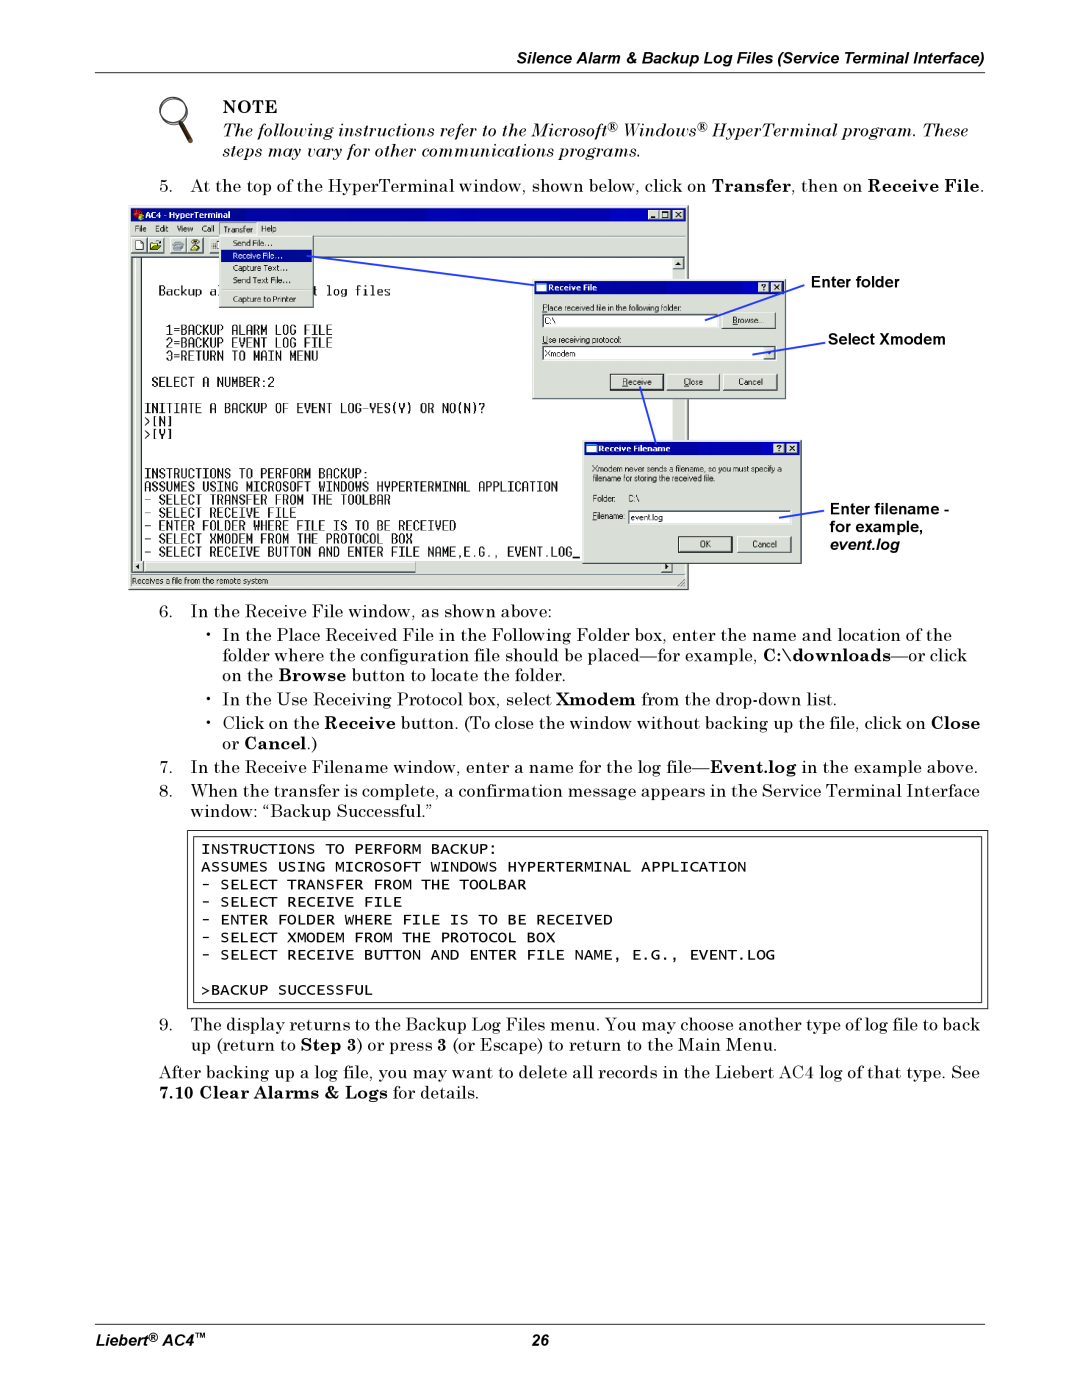 Emerson AC4 user manual In the Receive File window, as shown above 